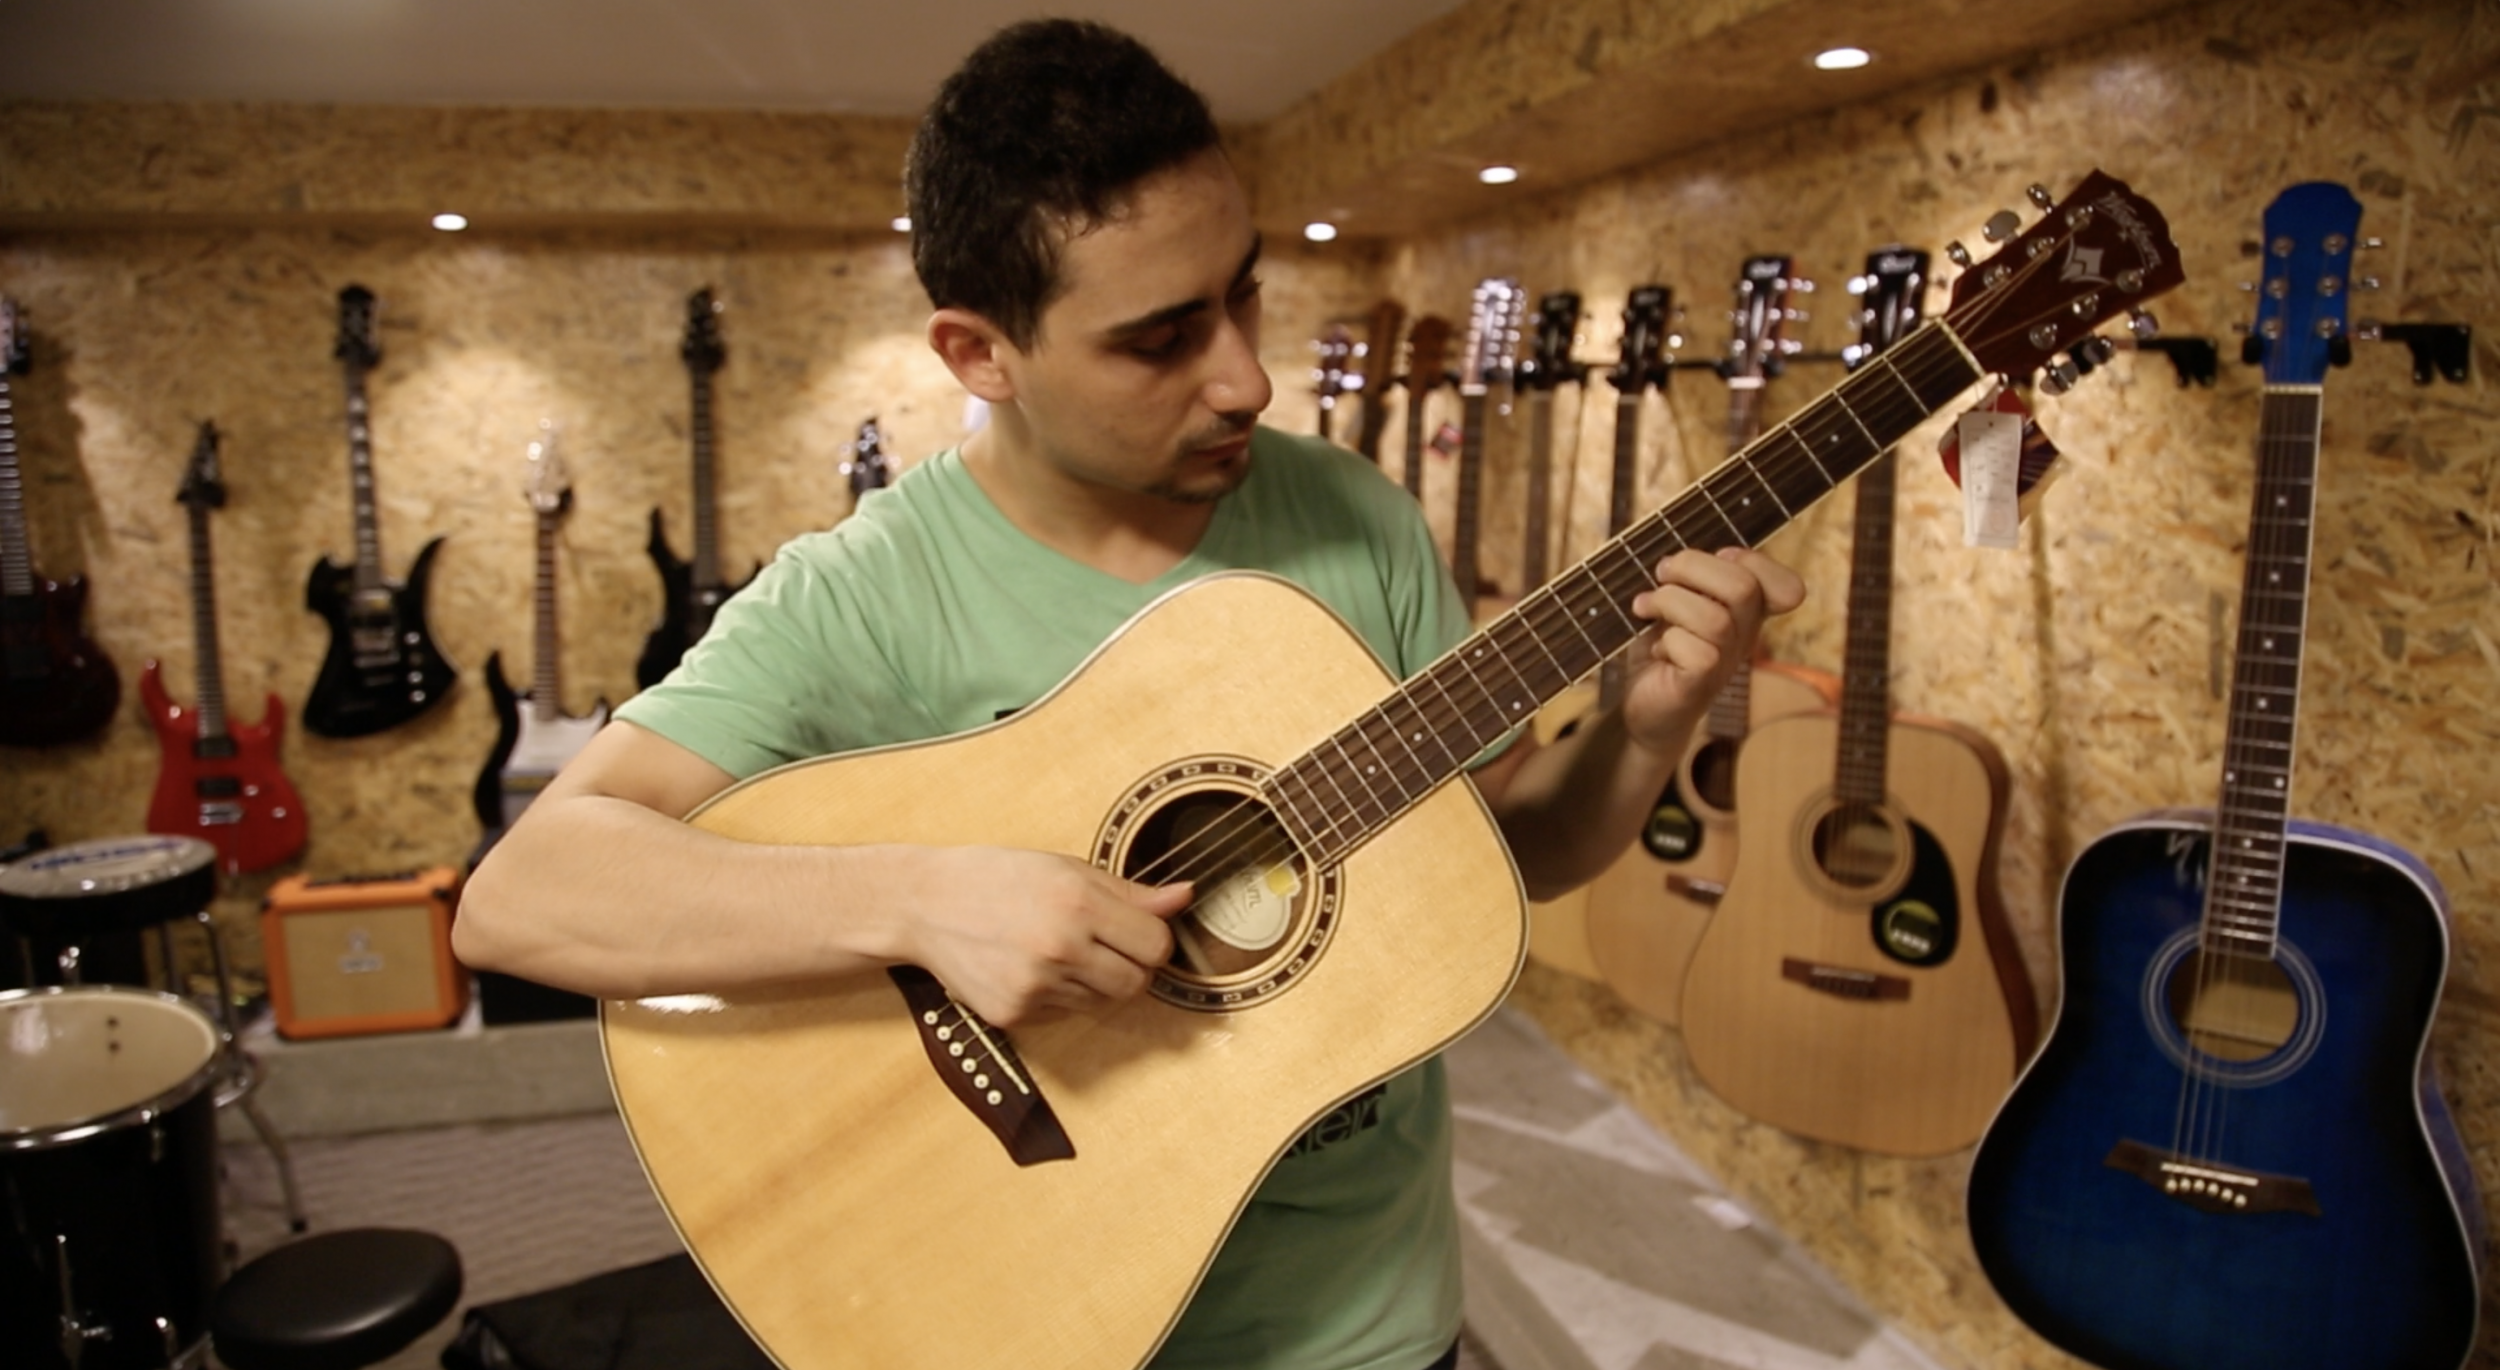 Raji Jaru, the owner of Gaza’s first music shop, plays the guitar